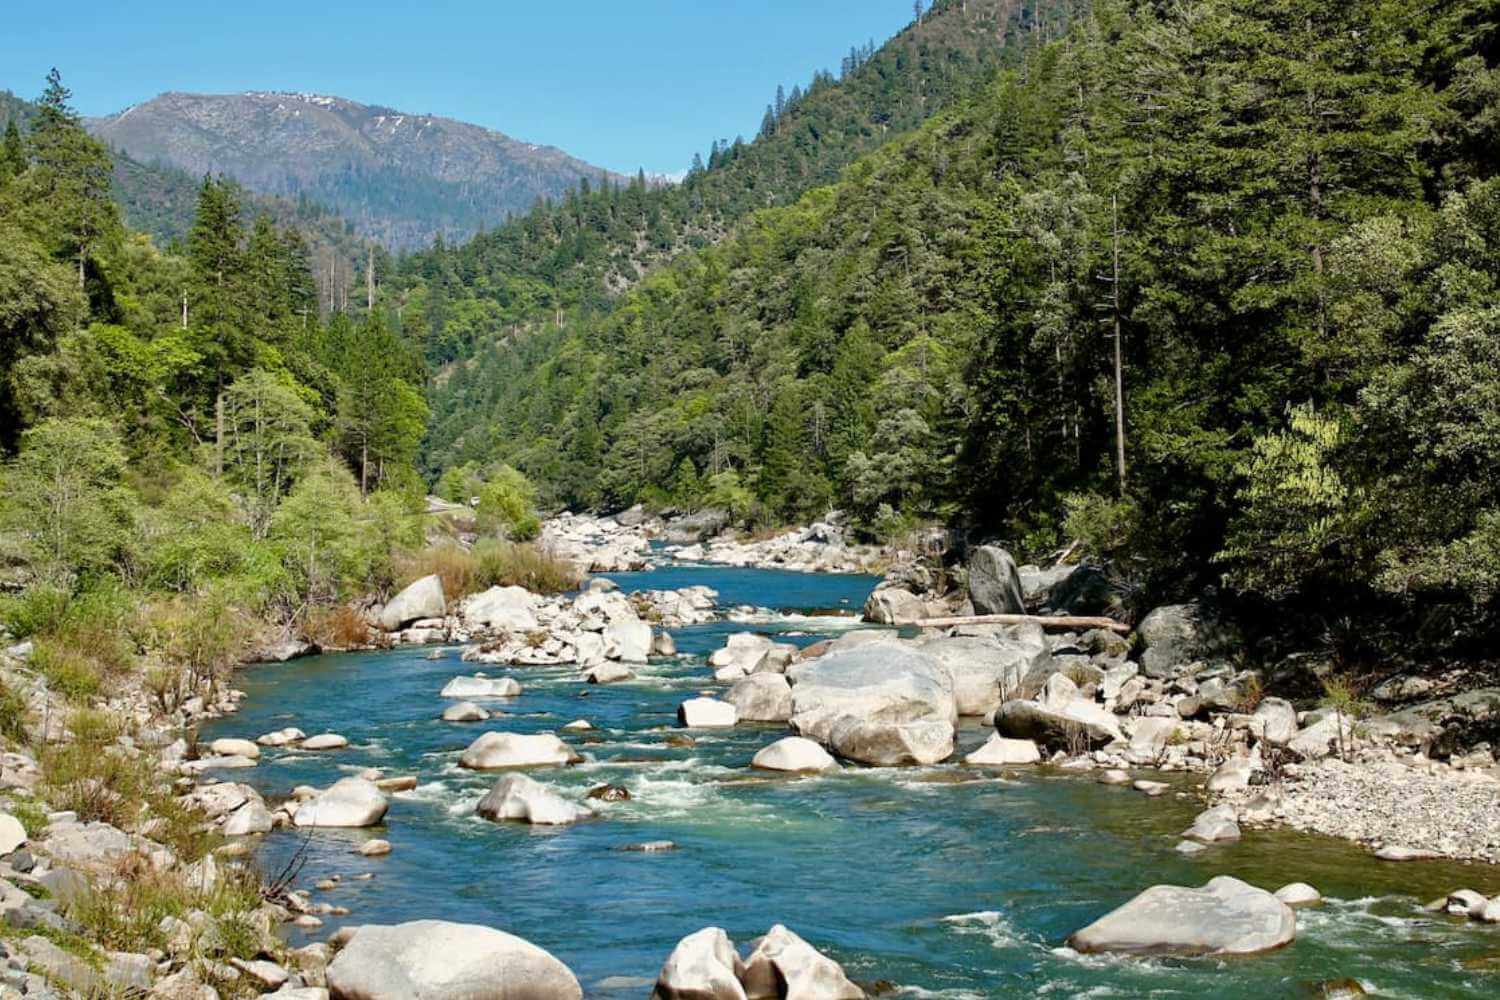 North Fork of the Feather River